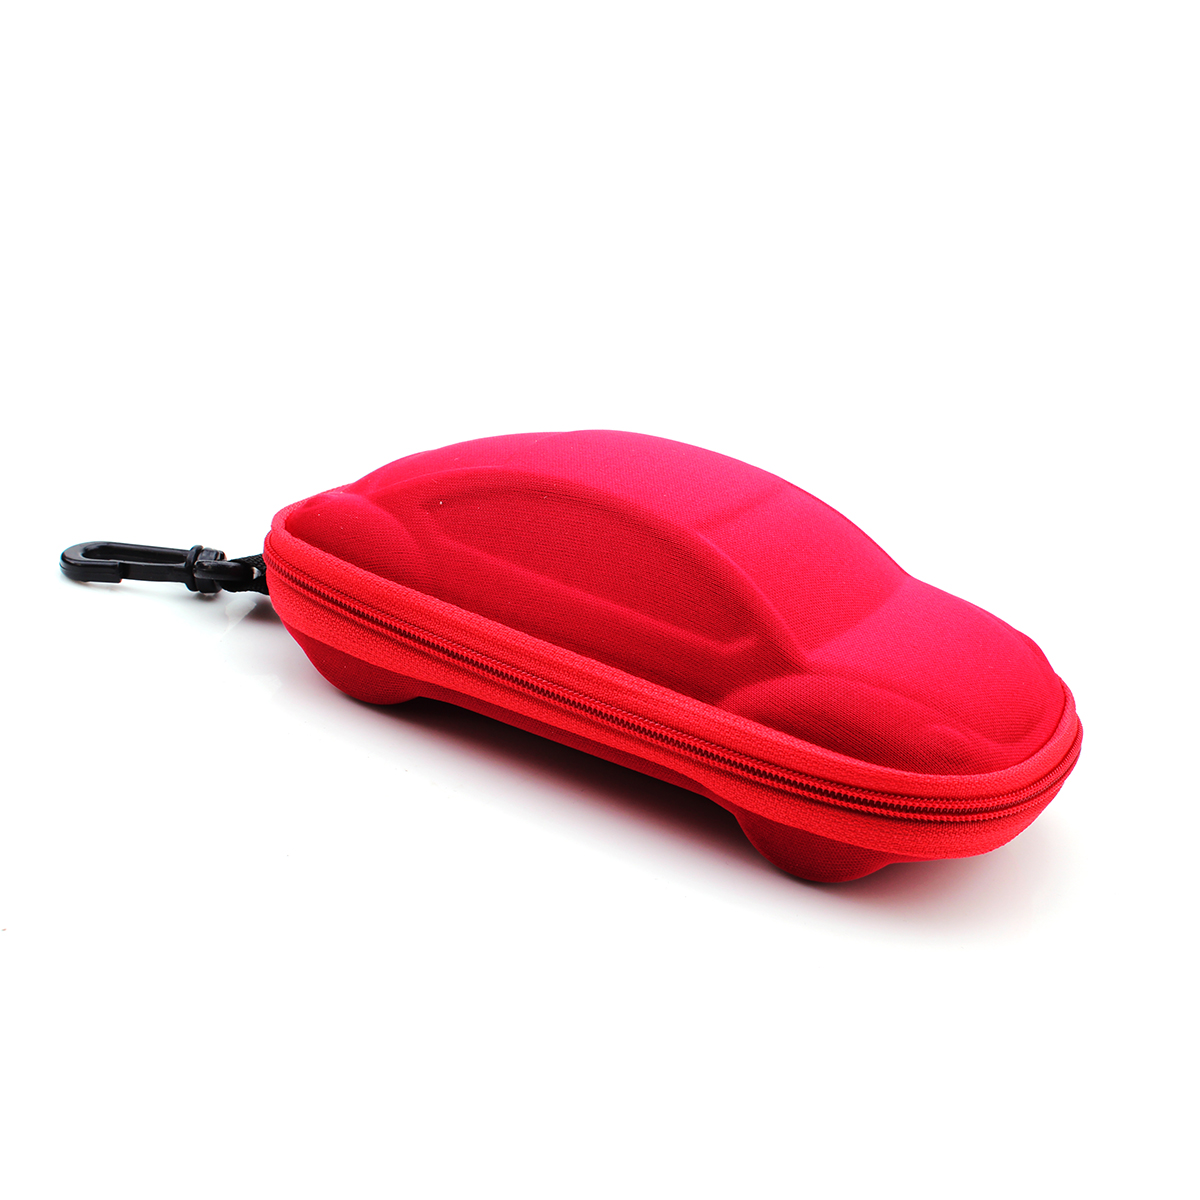 With Hook (2 Red In The Same Color)2 individual a car glasses case Cartoon automobile Model children Sun glasses Box lovely zipper bag Toy box